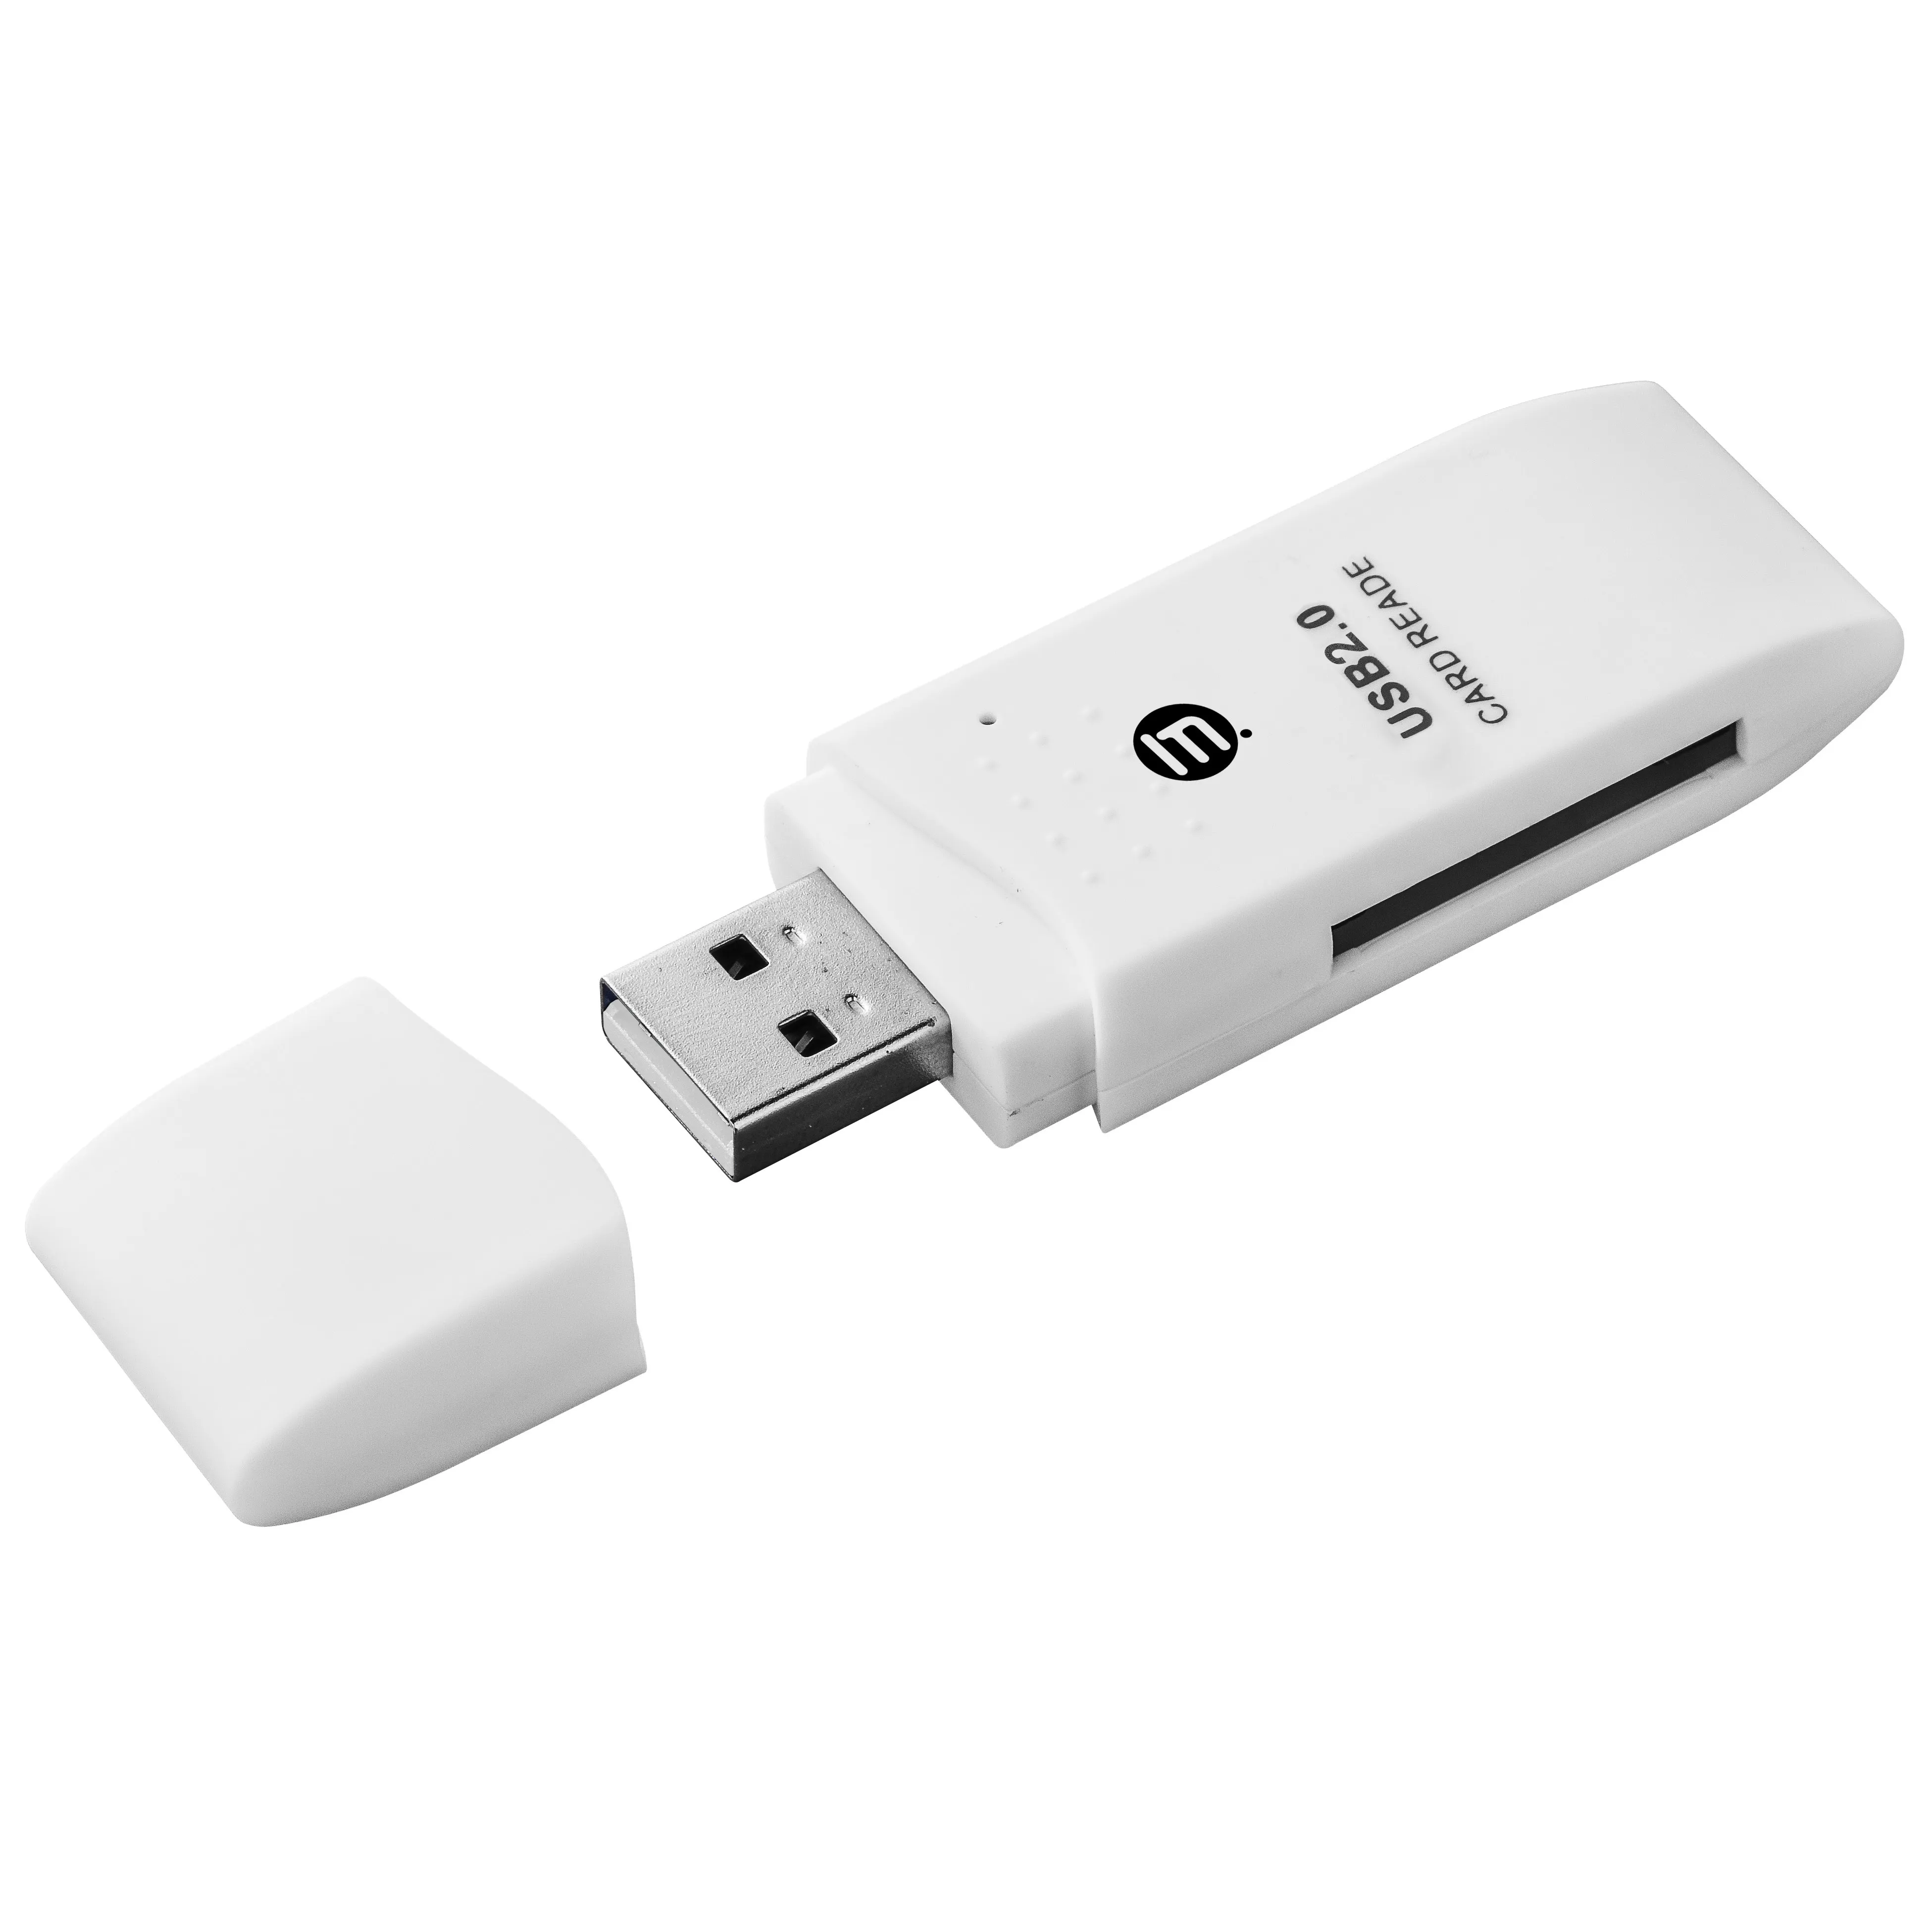 480Mbps memory card readers All in 1 micro-sd card reader with Led Support Win 8 / 7 / Vista, MAC OSX, and a USB